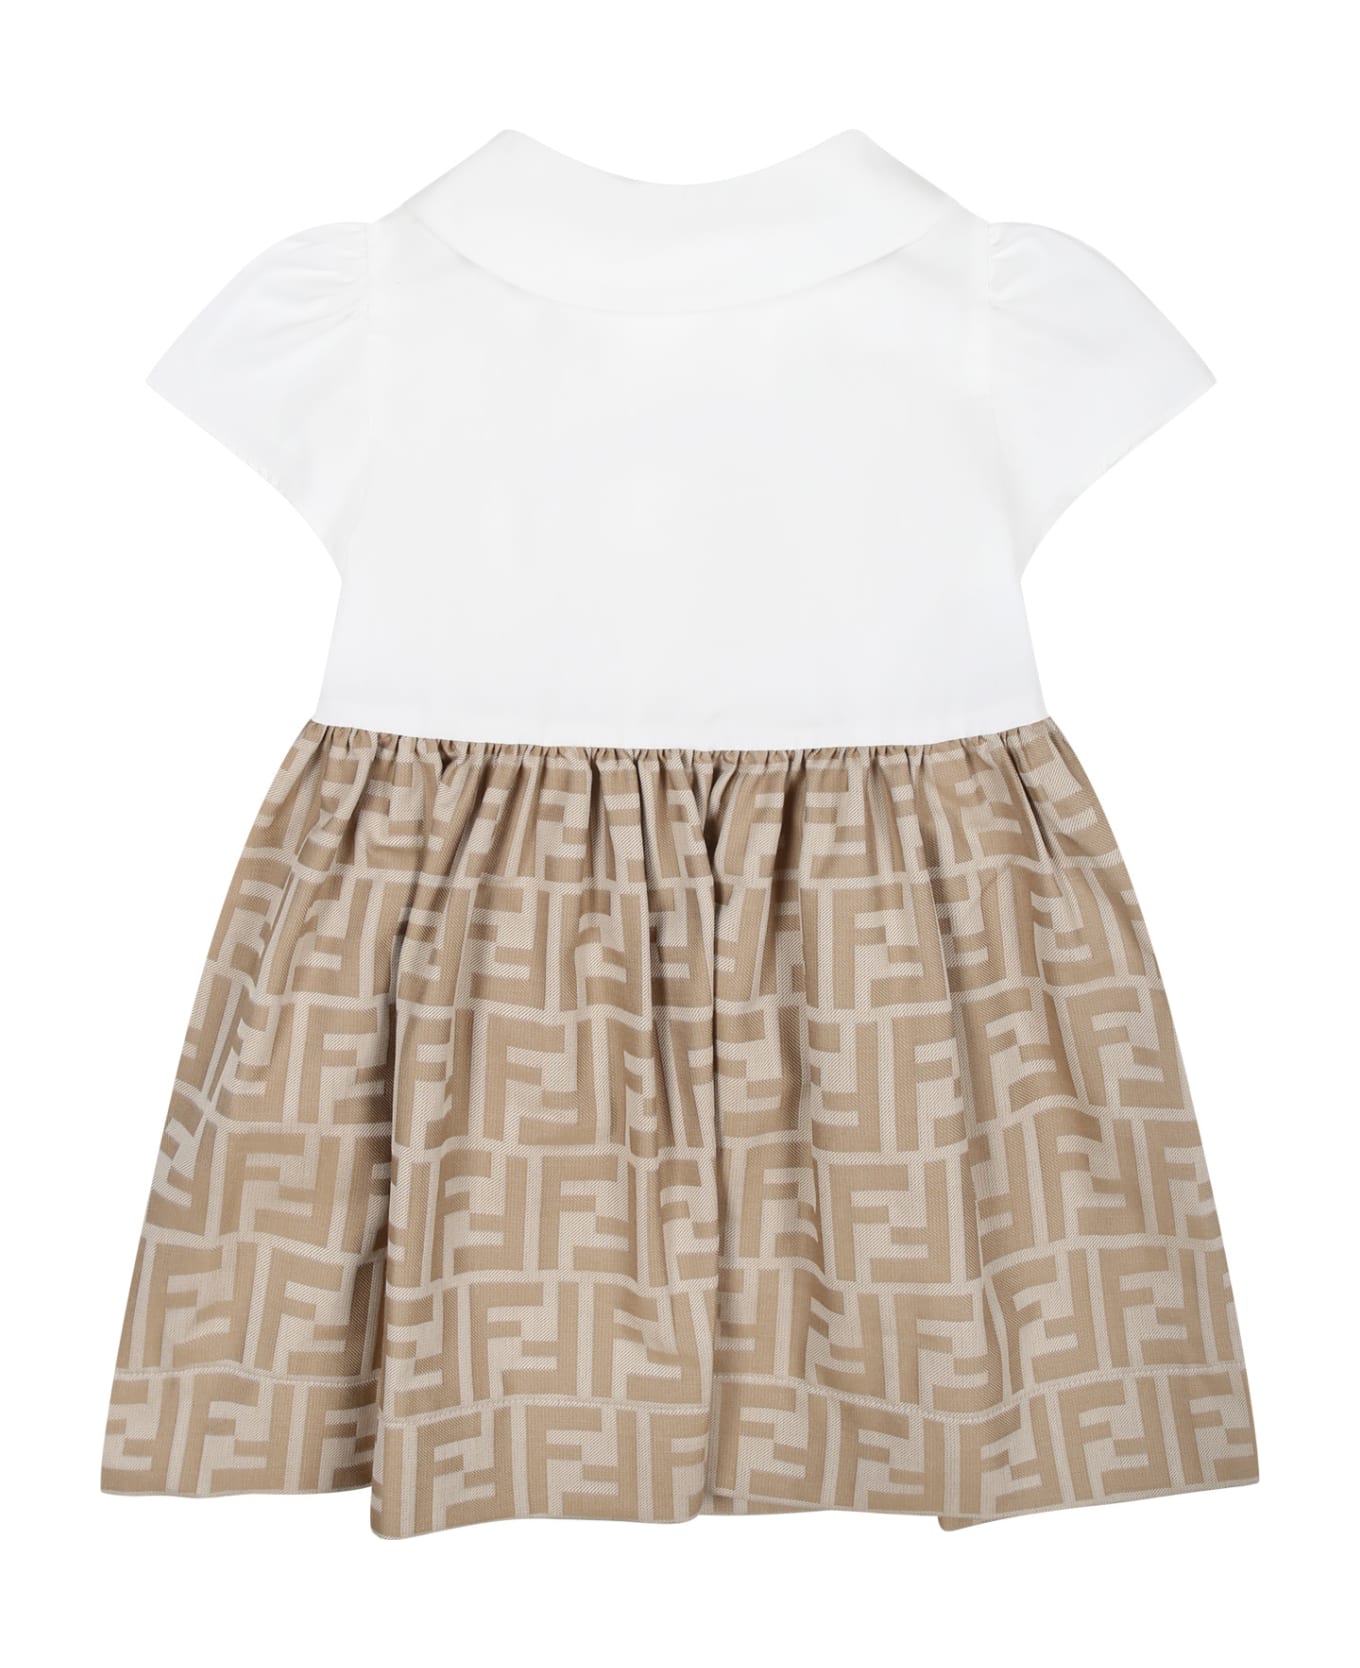 Fendi Tights Multicolor Dress For Baby Girl With Iconic Ff - Multicolor